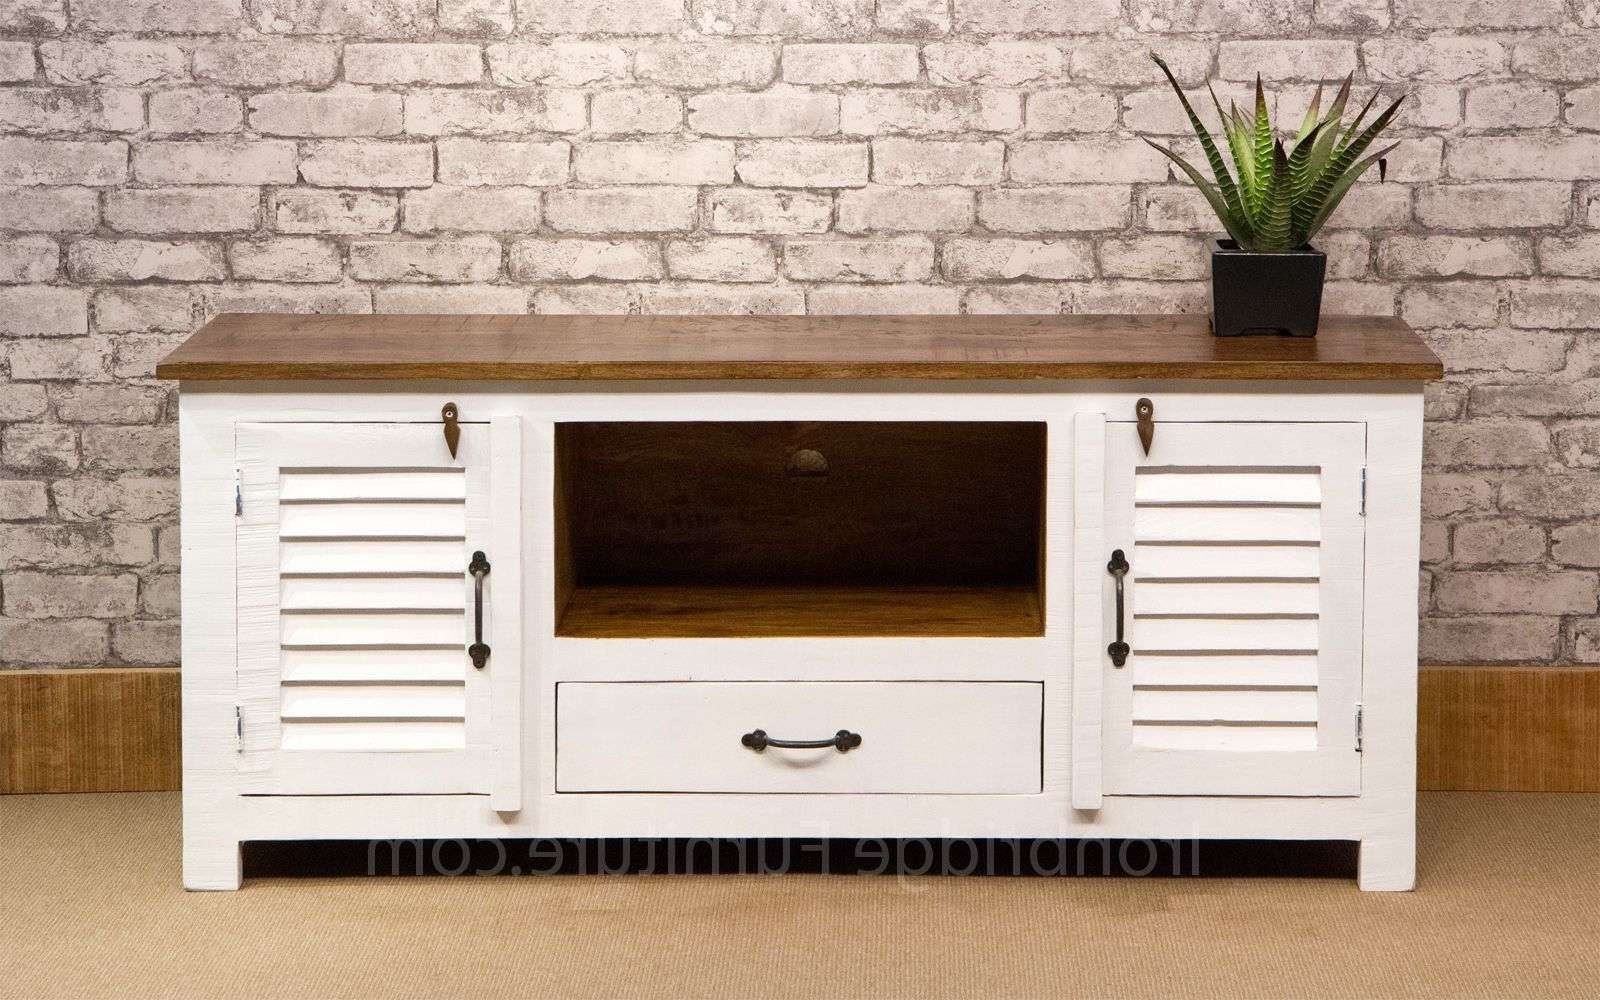 518 Vintage Style Painted Long Tv Cabinet – Farrow & Ball No. 2005 Inside White Painted Tv Cabinets (Gallery 8 of 20)